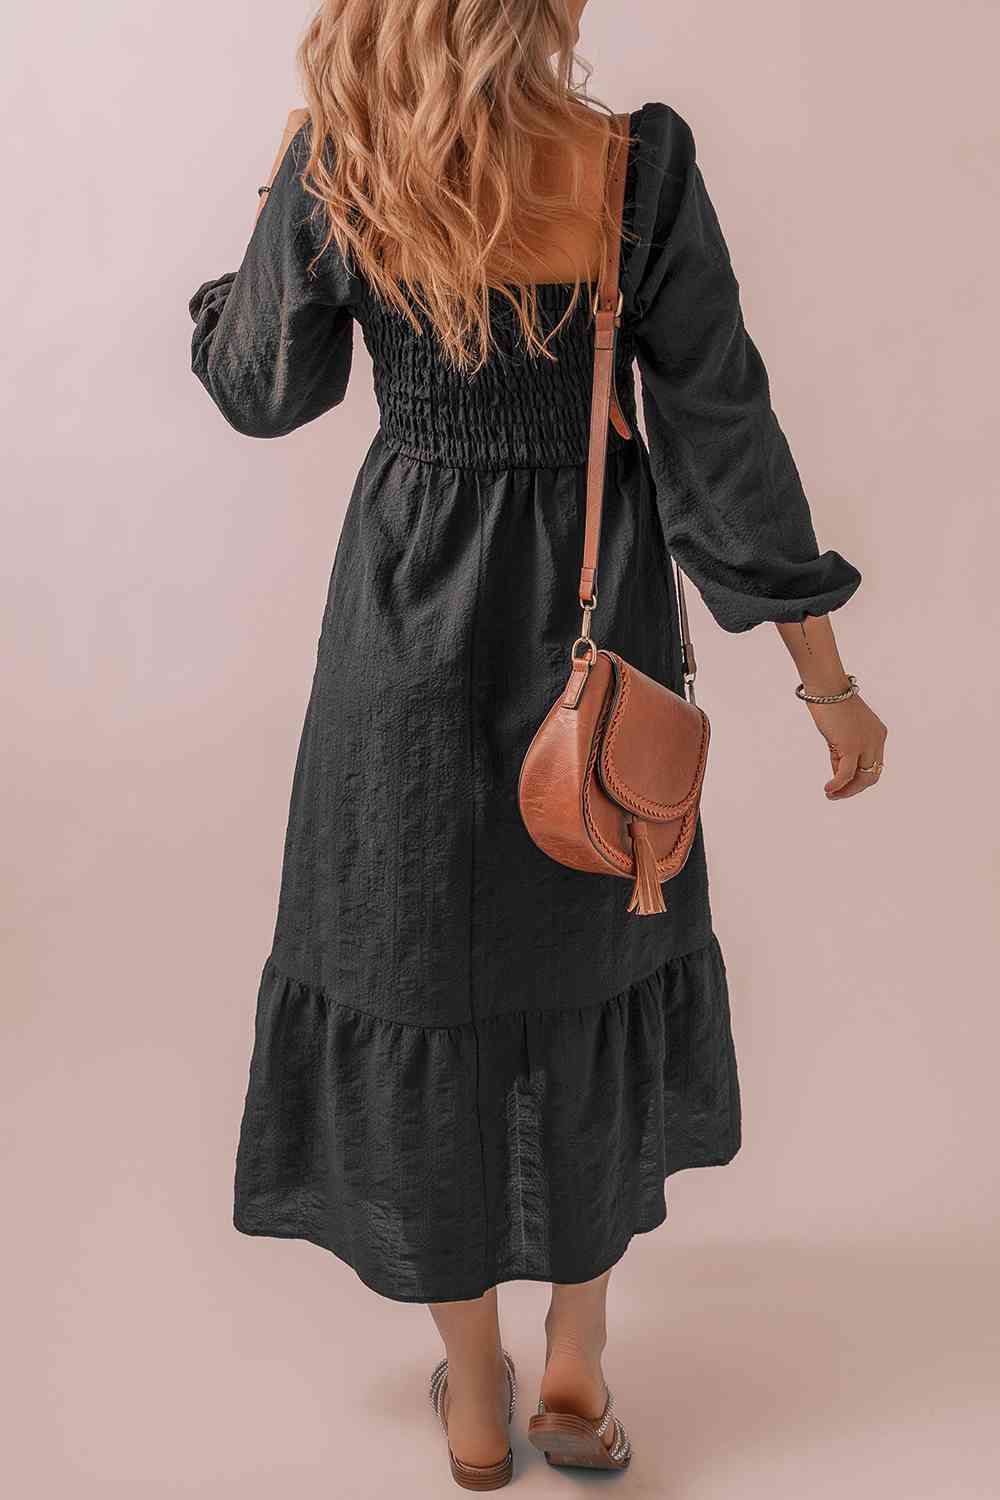 Square Neck Alluring Long Sleeve Dress